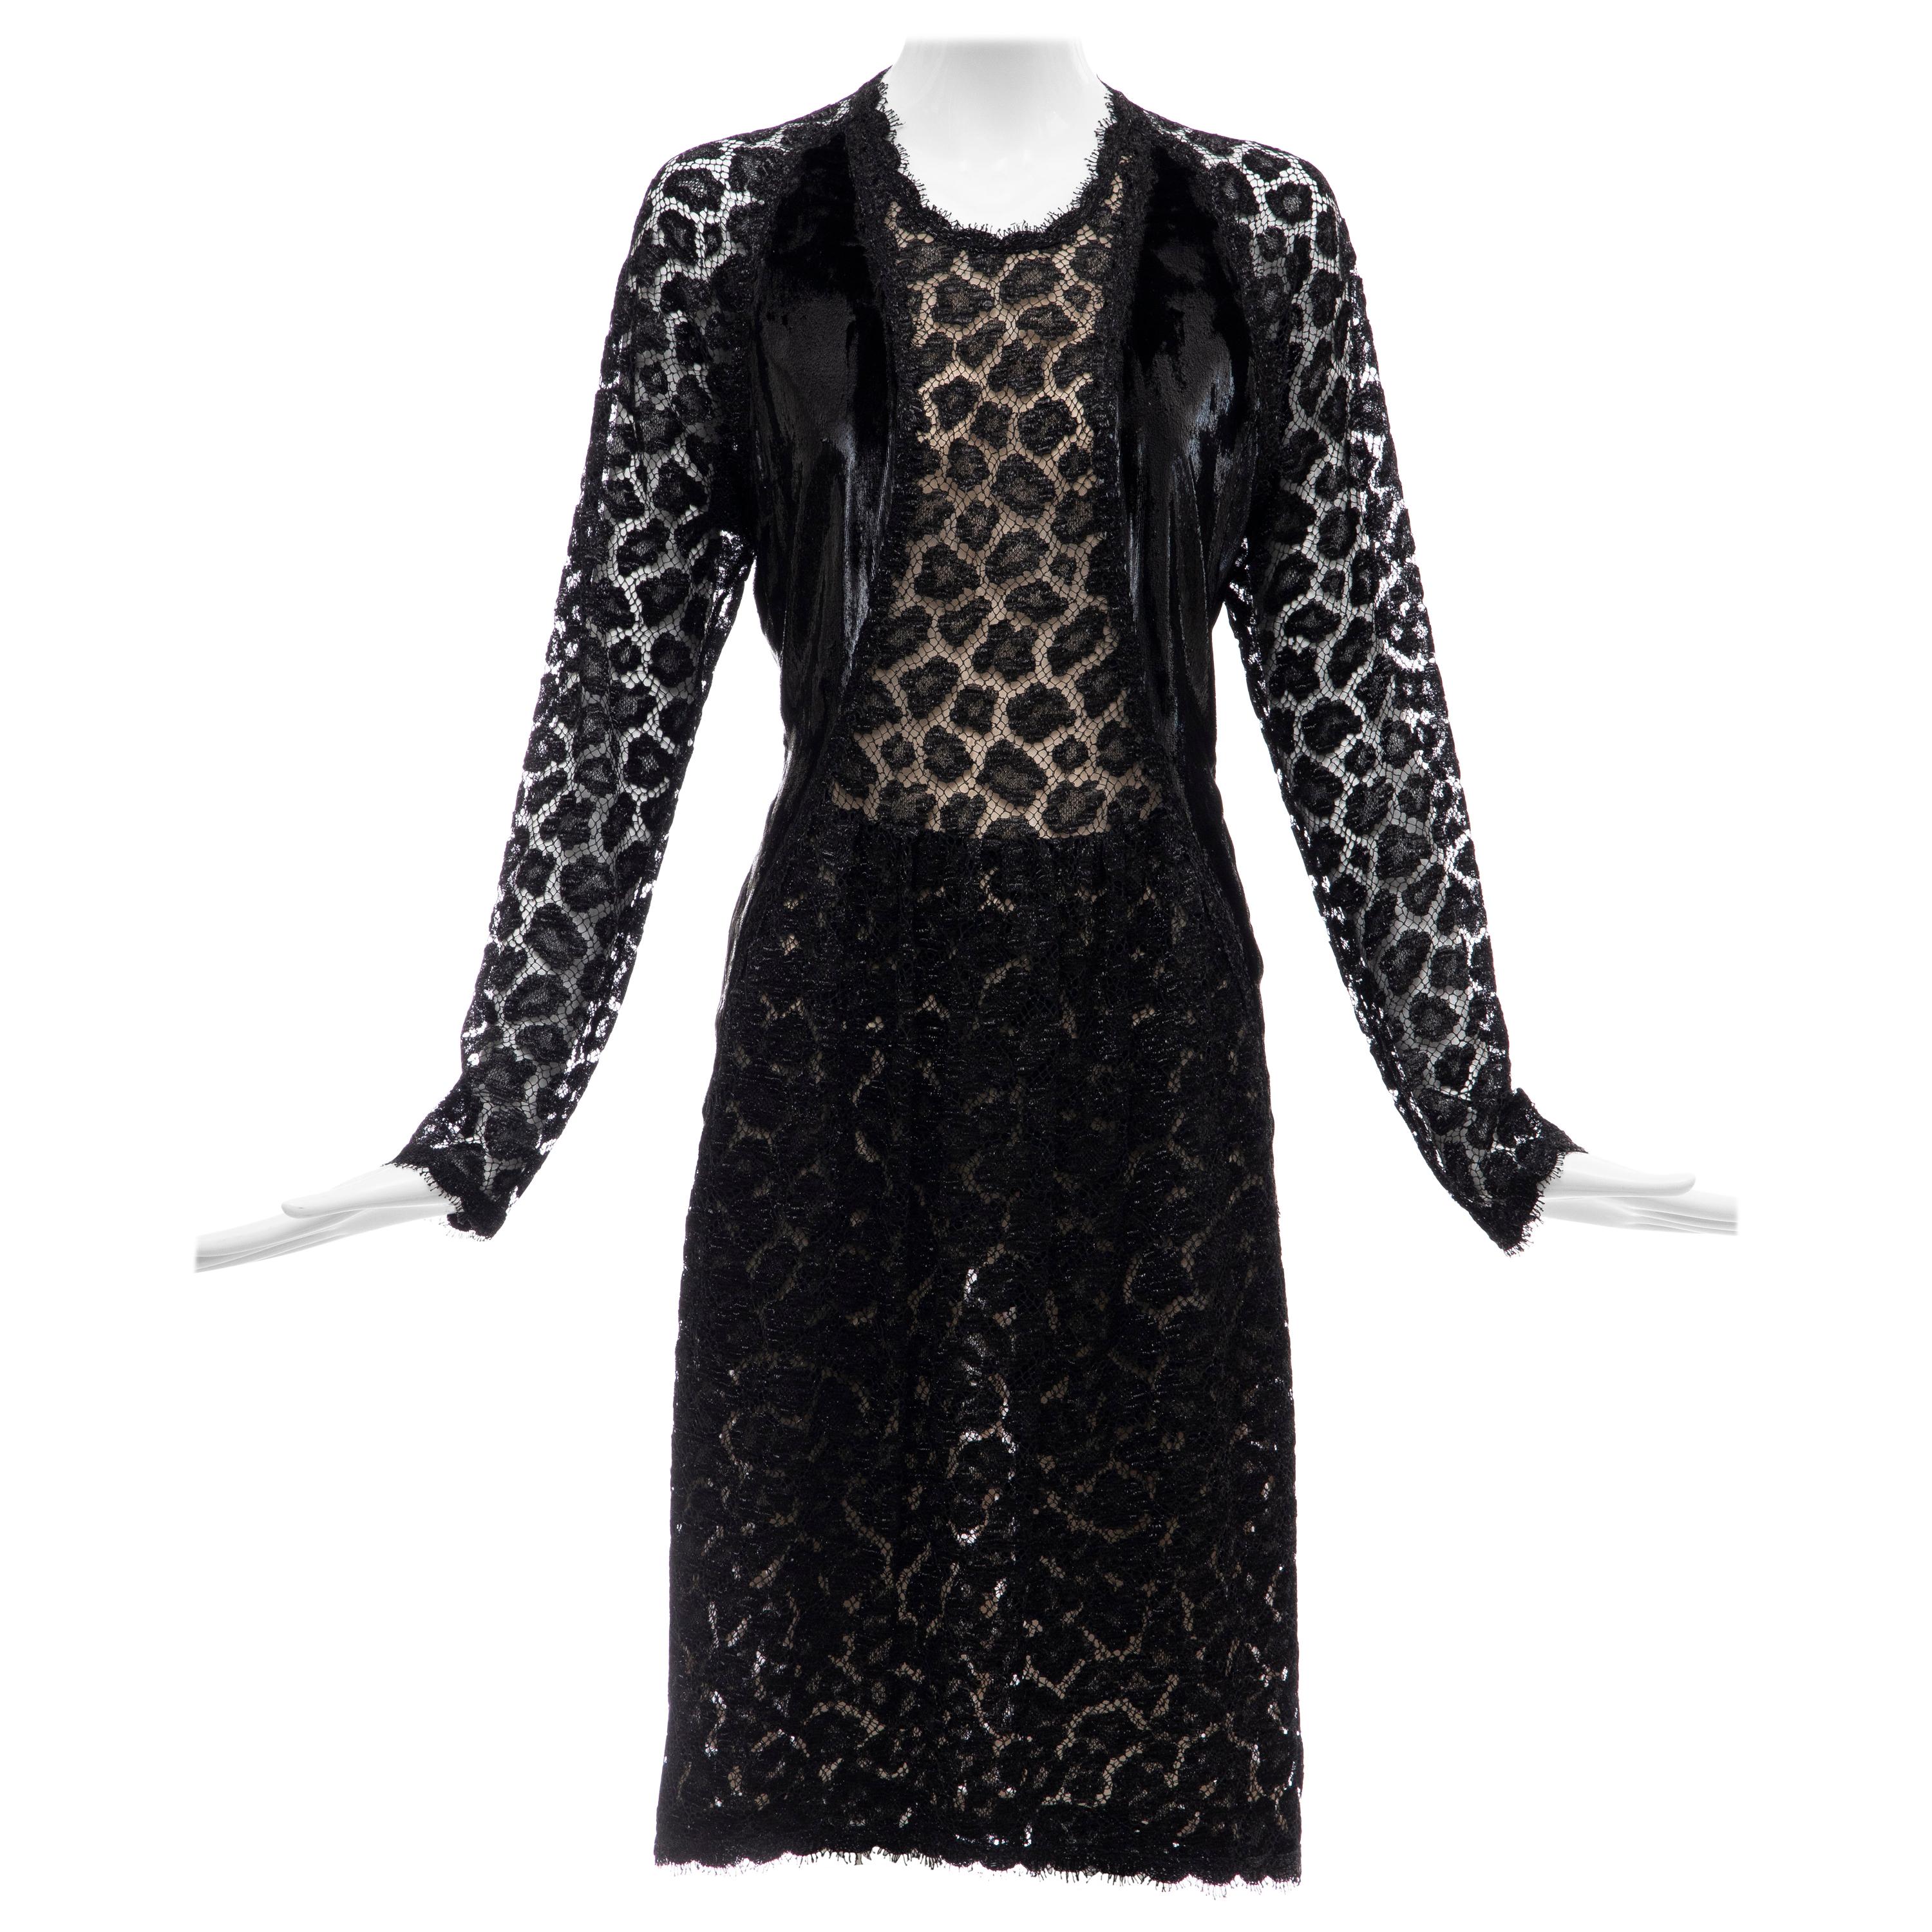 Geoffrey Beene Black Metallic Leopard Lace Dress "Circus Collection", Fall 1992 For Sale